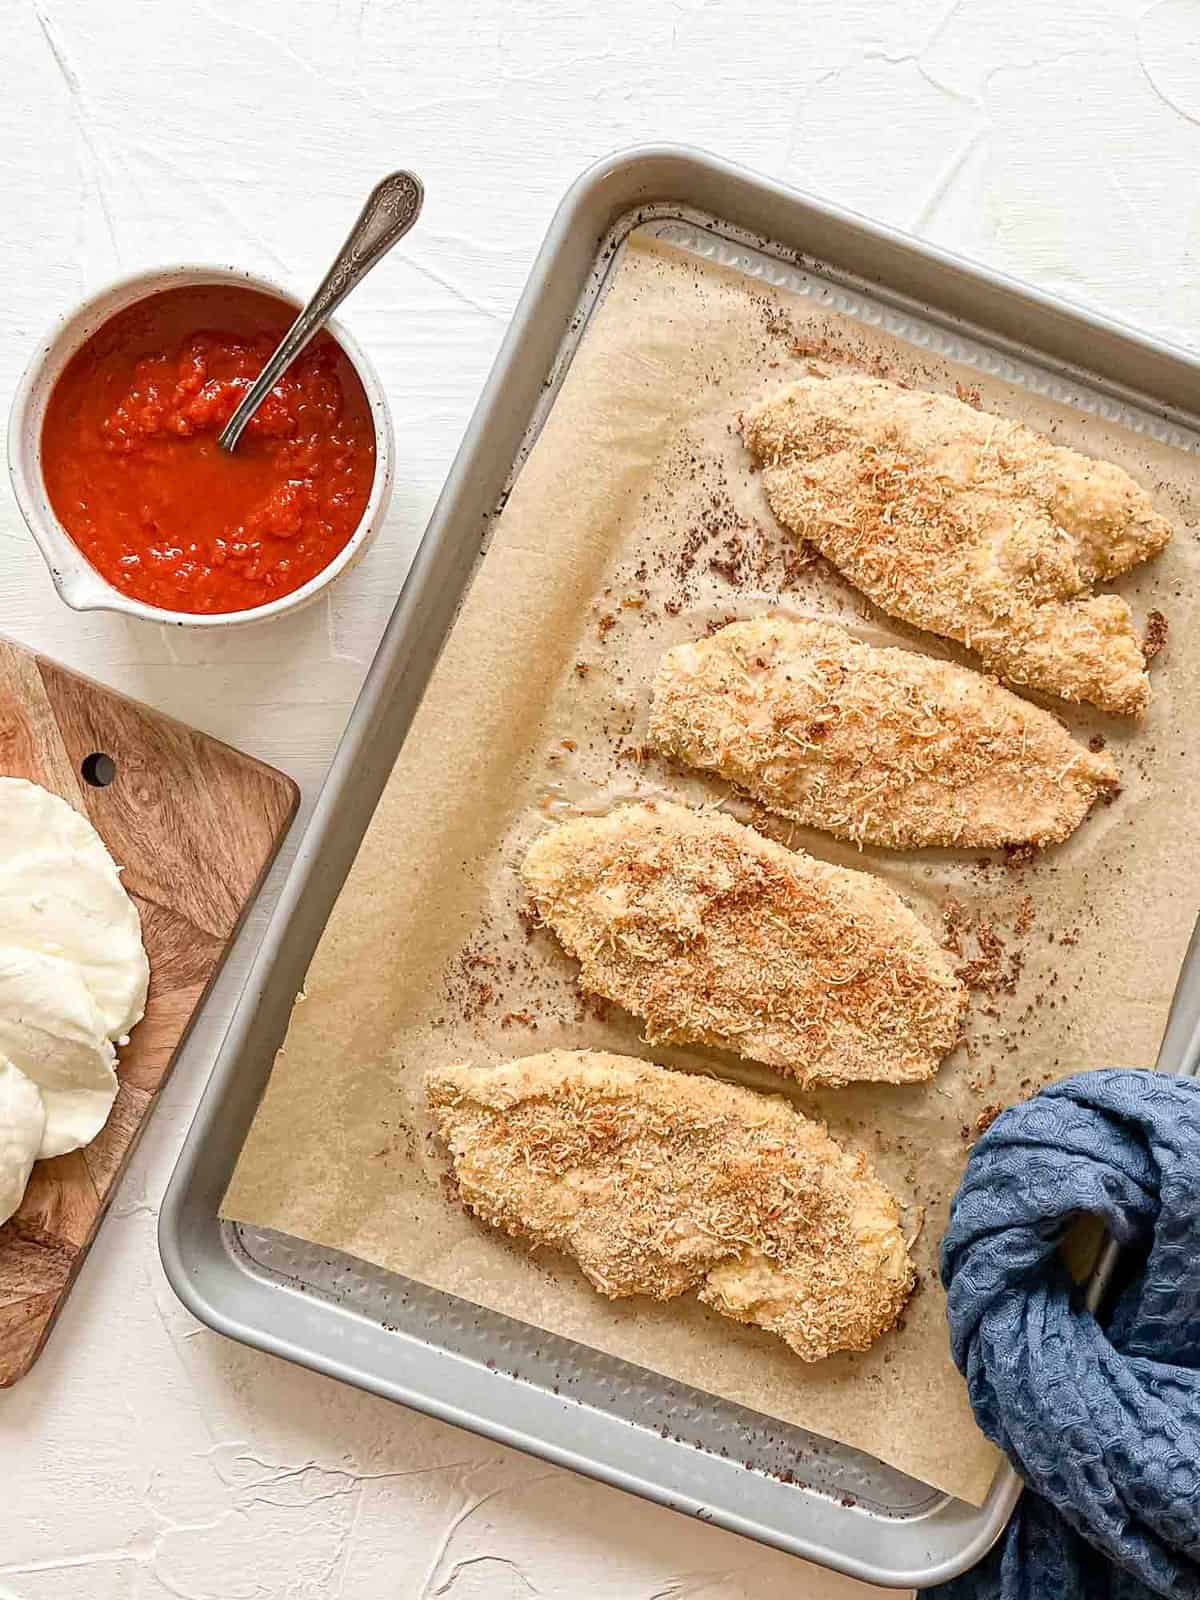 Breaded Chicken Breasts on baking sheet for Baked Chicken Parmesan.